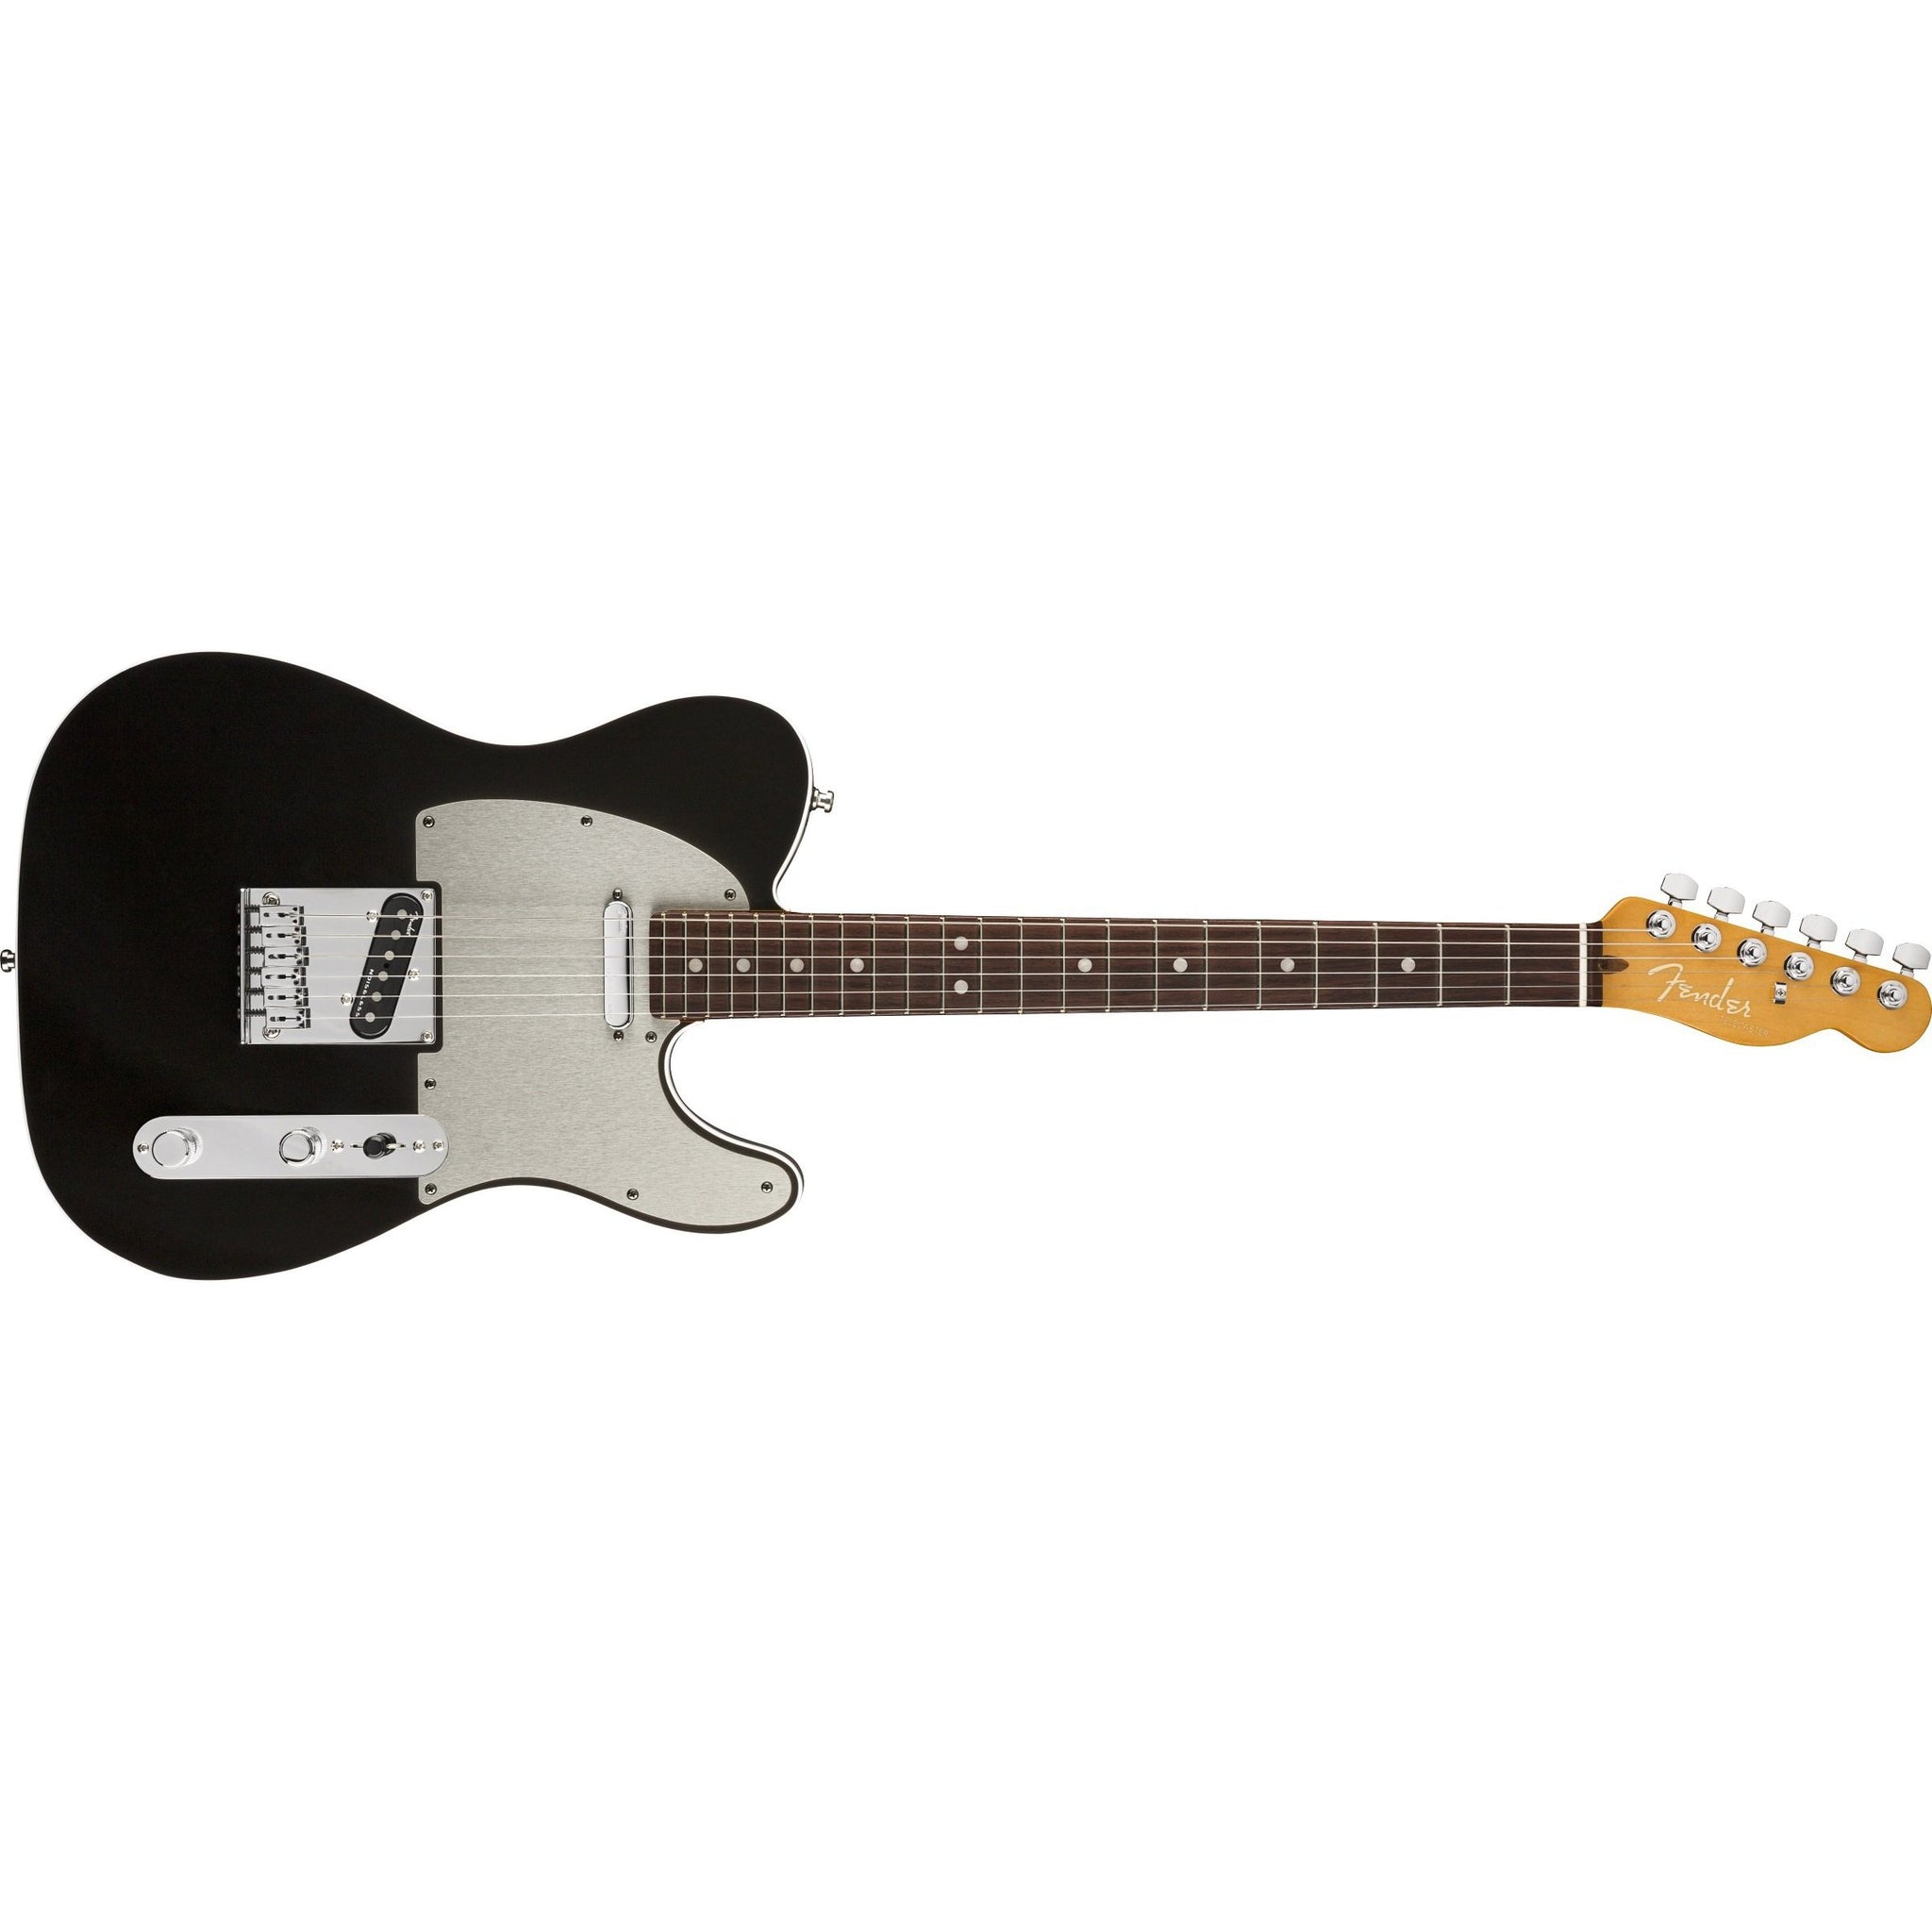 Fender American Ultra Telecaster Electric Guitar RW with Hardshell Case-Texas Tea-Music World Academy